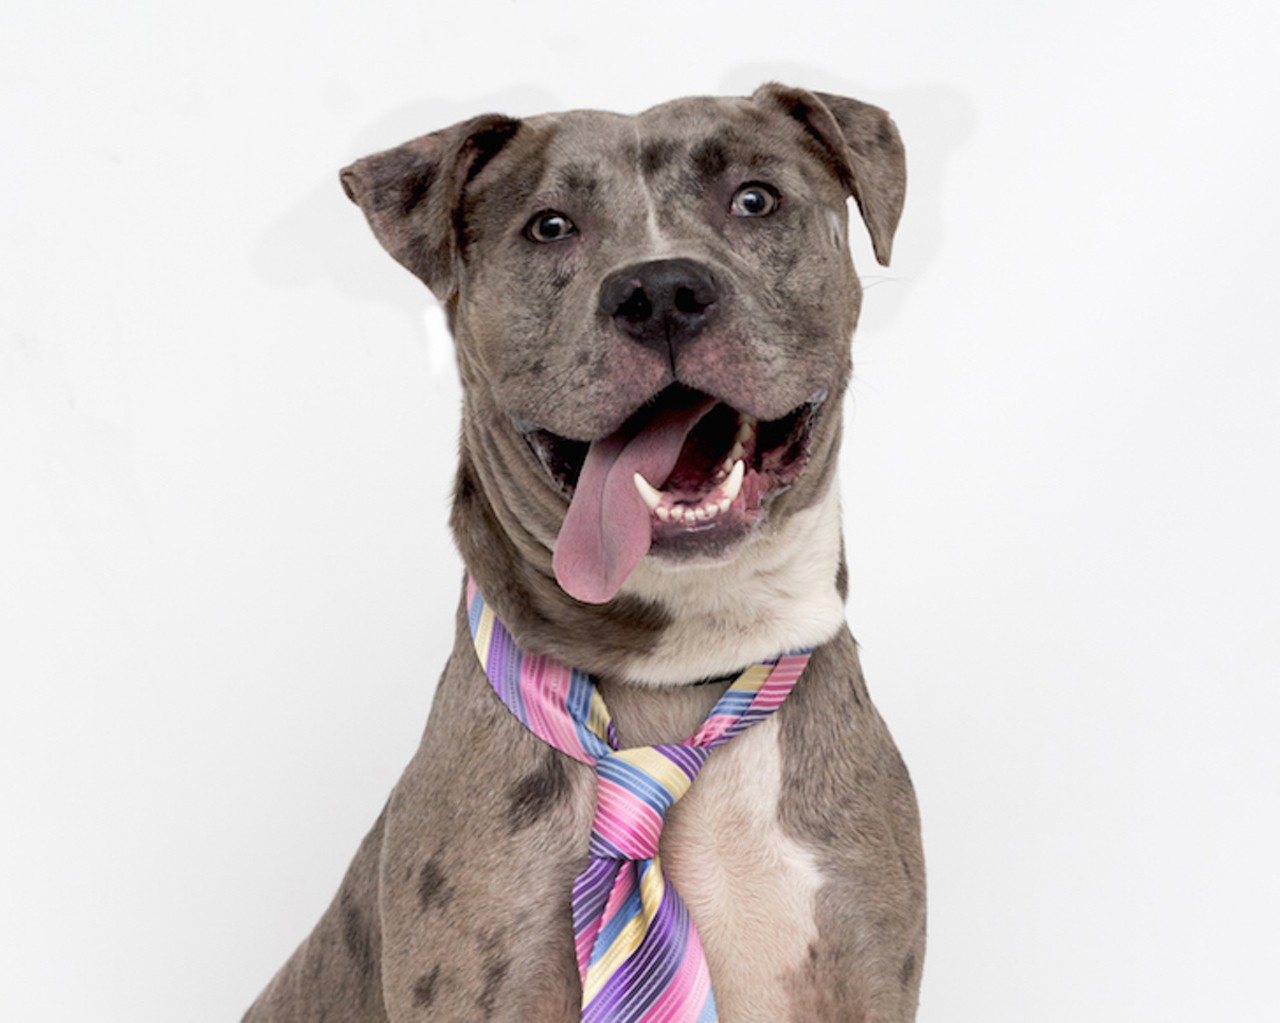 19 adoptable dogs available right now at Orange County Animal Services